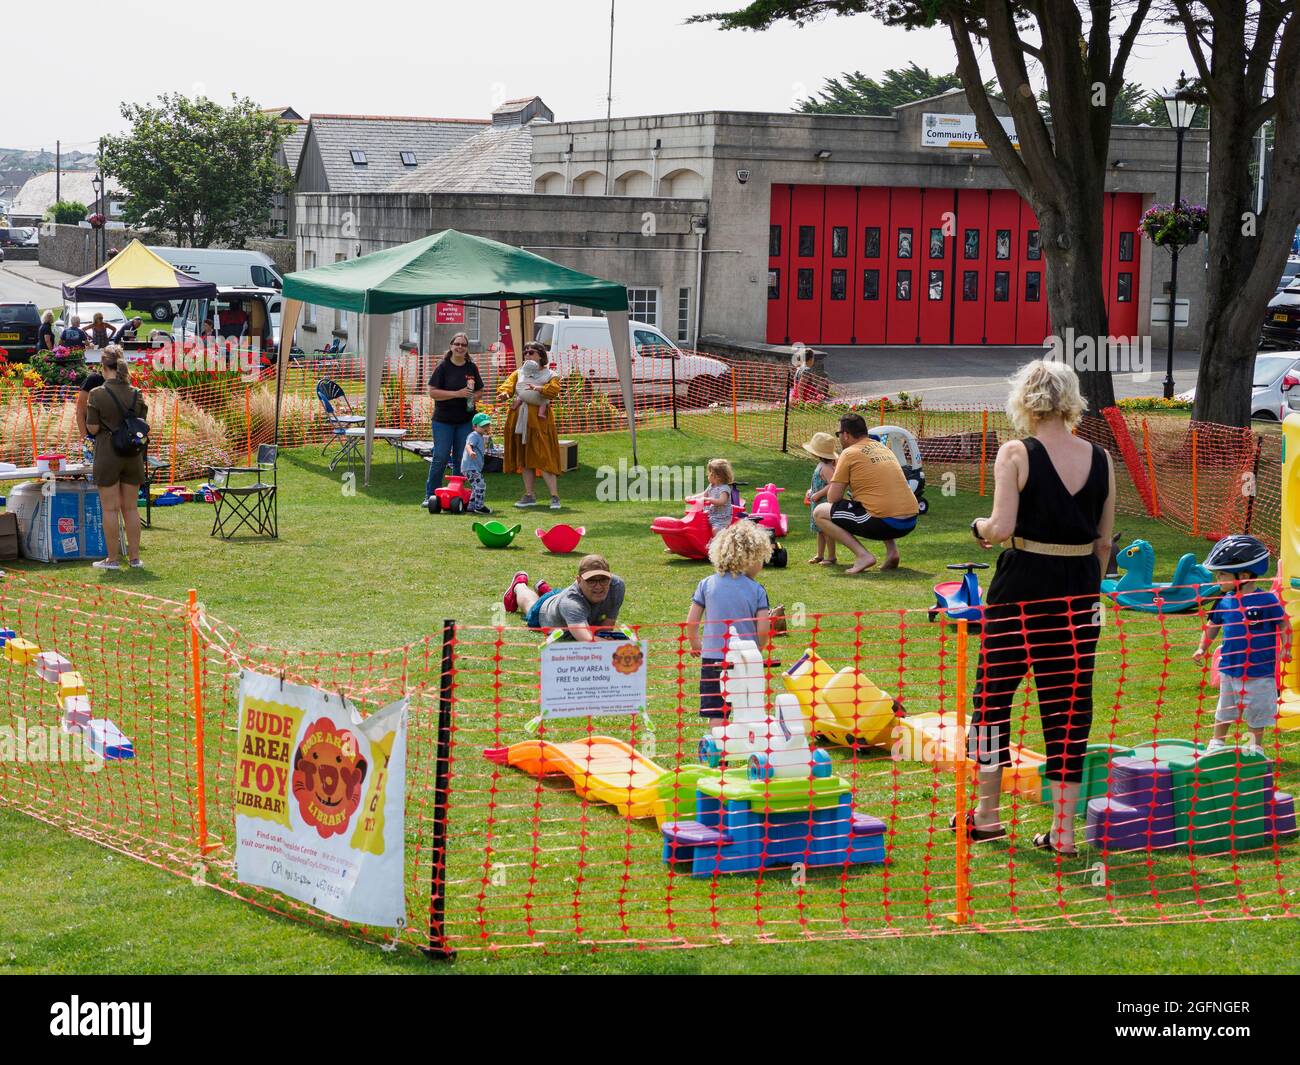 The Bude area toy library, (parents can borrow toys for children 0-5) providing a free play area for children at the Bude-Stratton Heritage Festival, Stock Photo